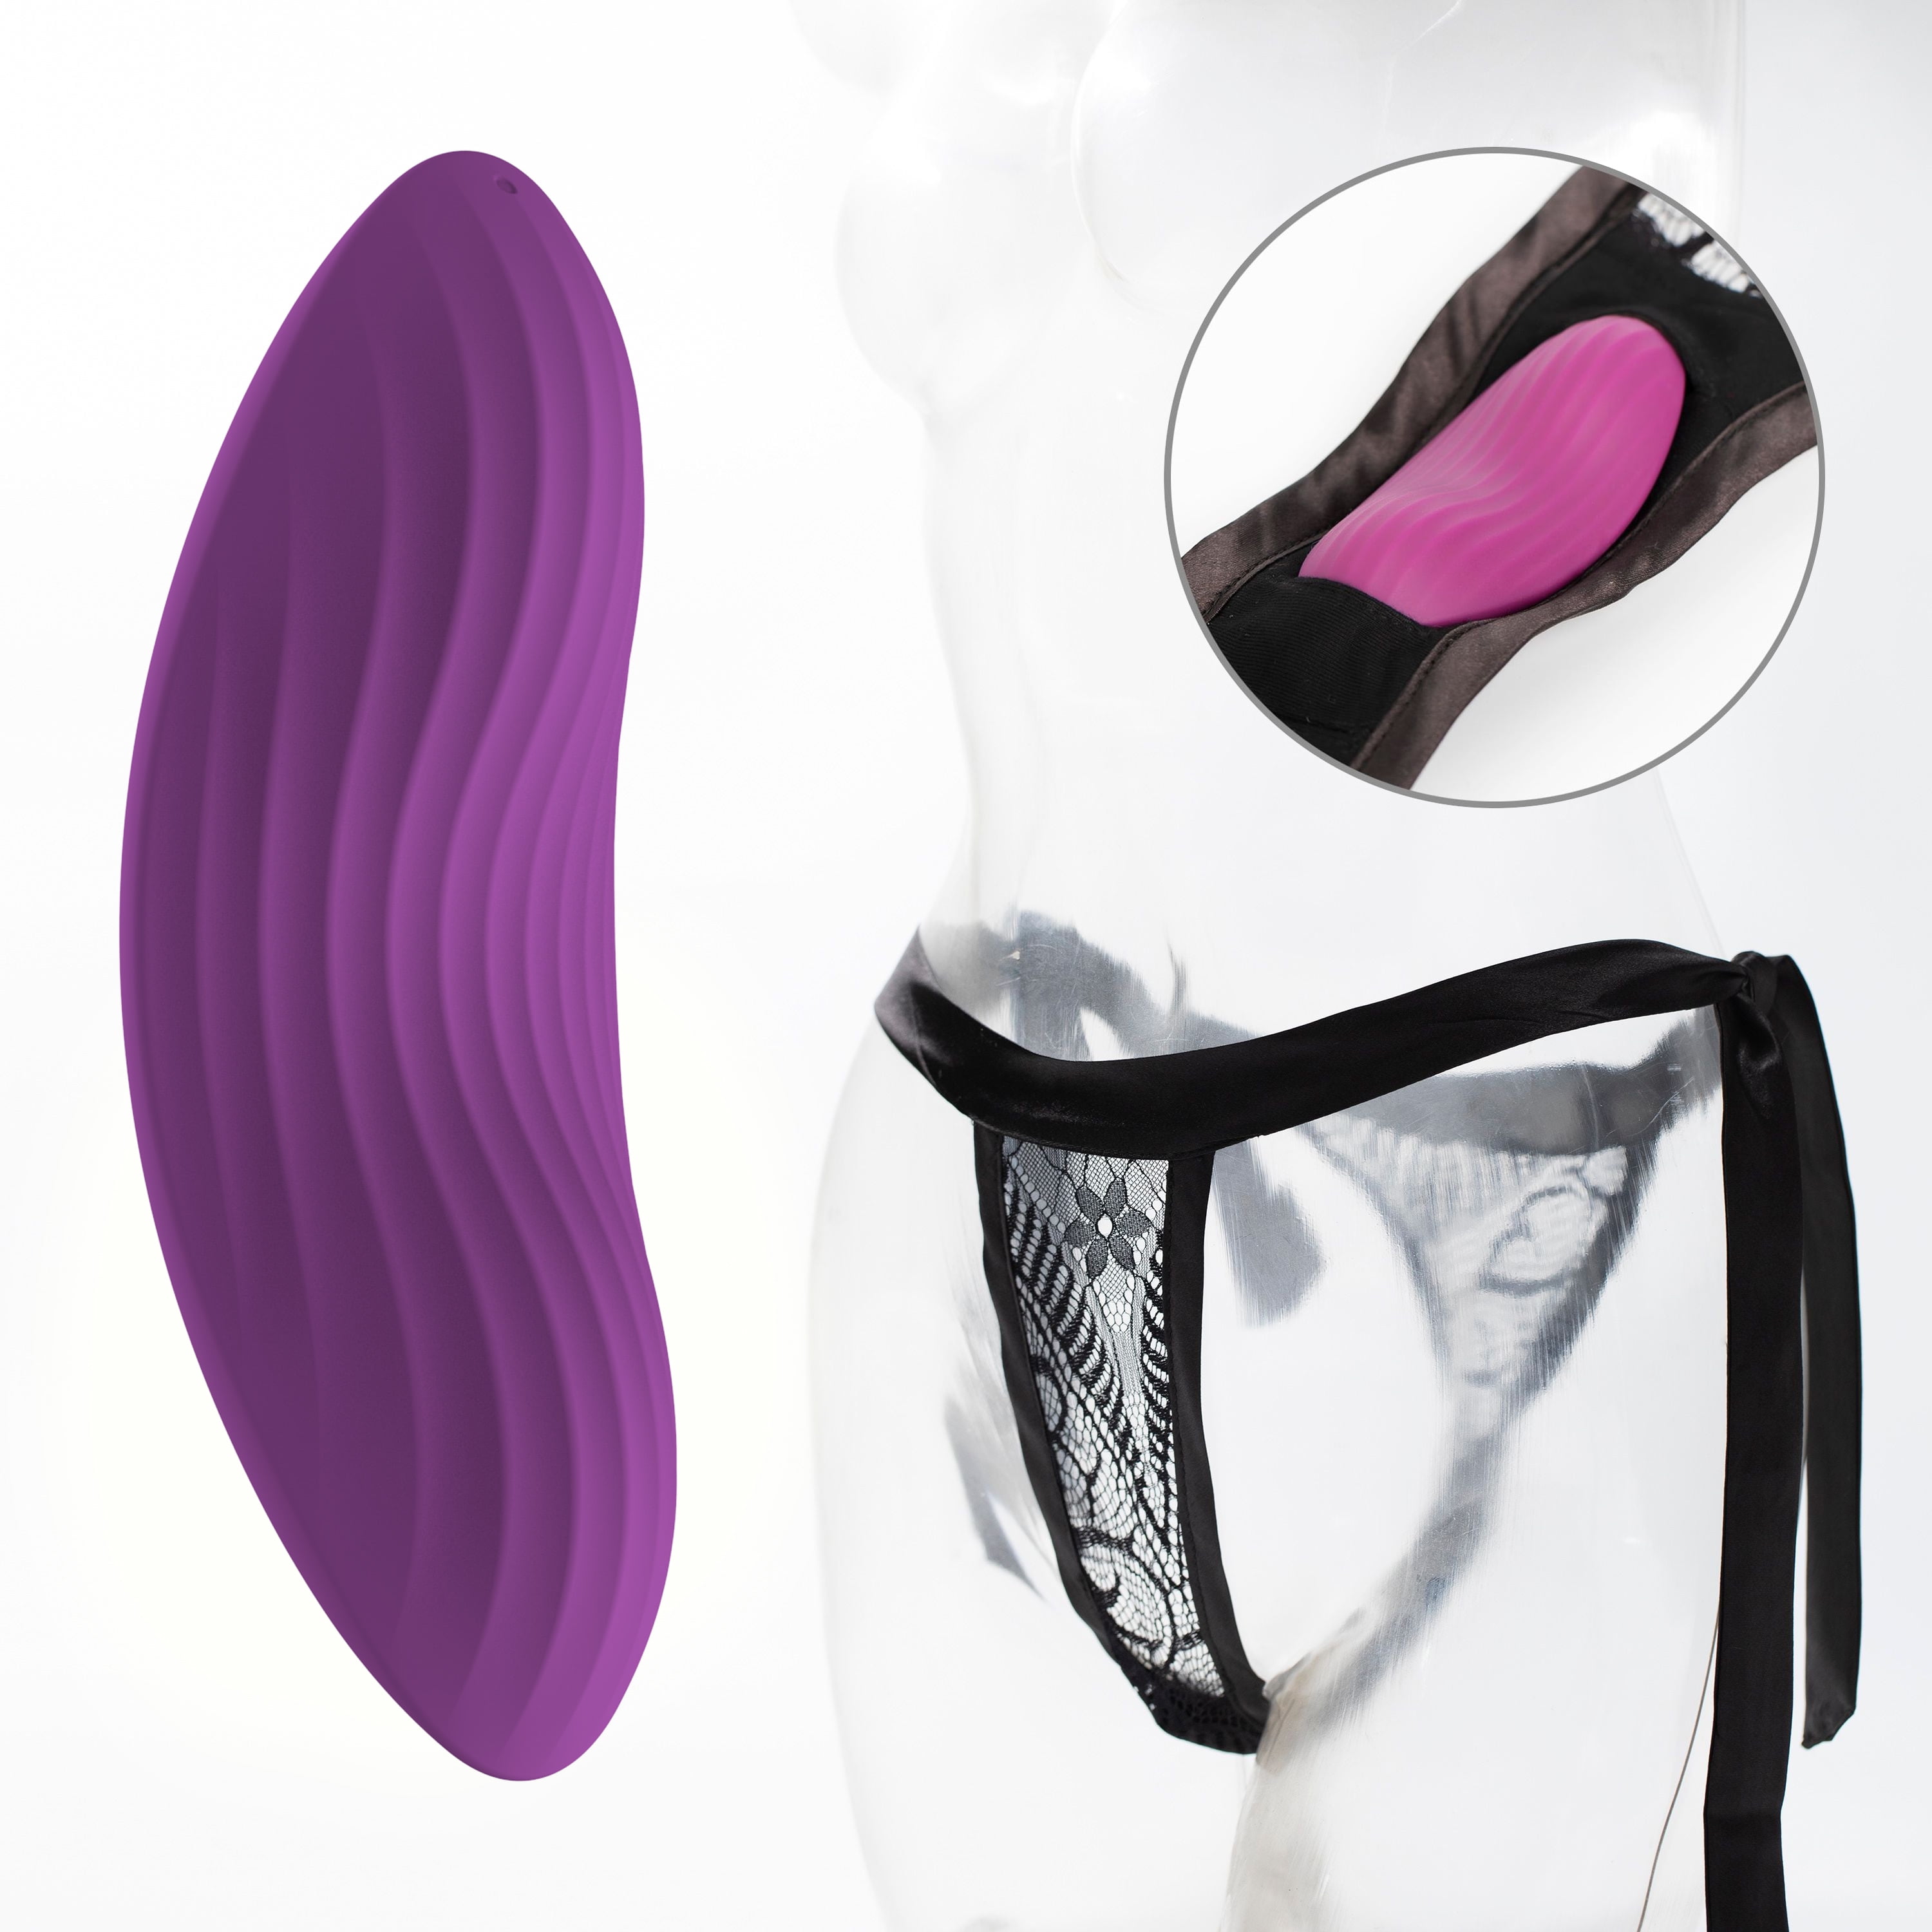 SVAKOM Edney Wearable Vibrator Vibrating Knickers, App-Controlled Clitoral Stimulator, Sex Toys for Women